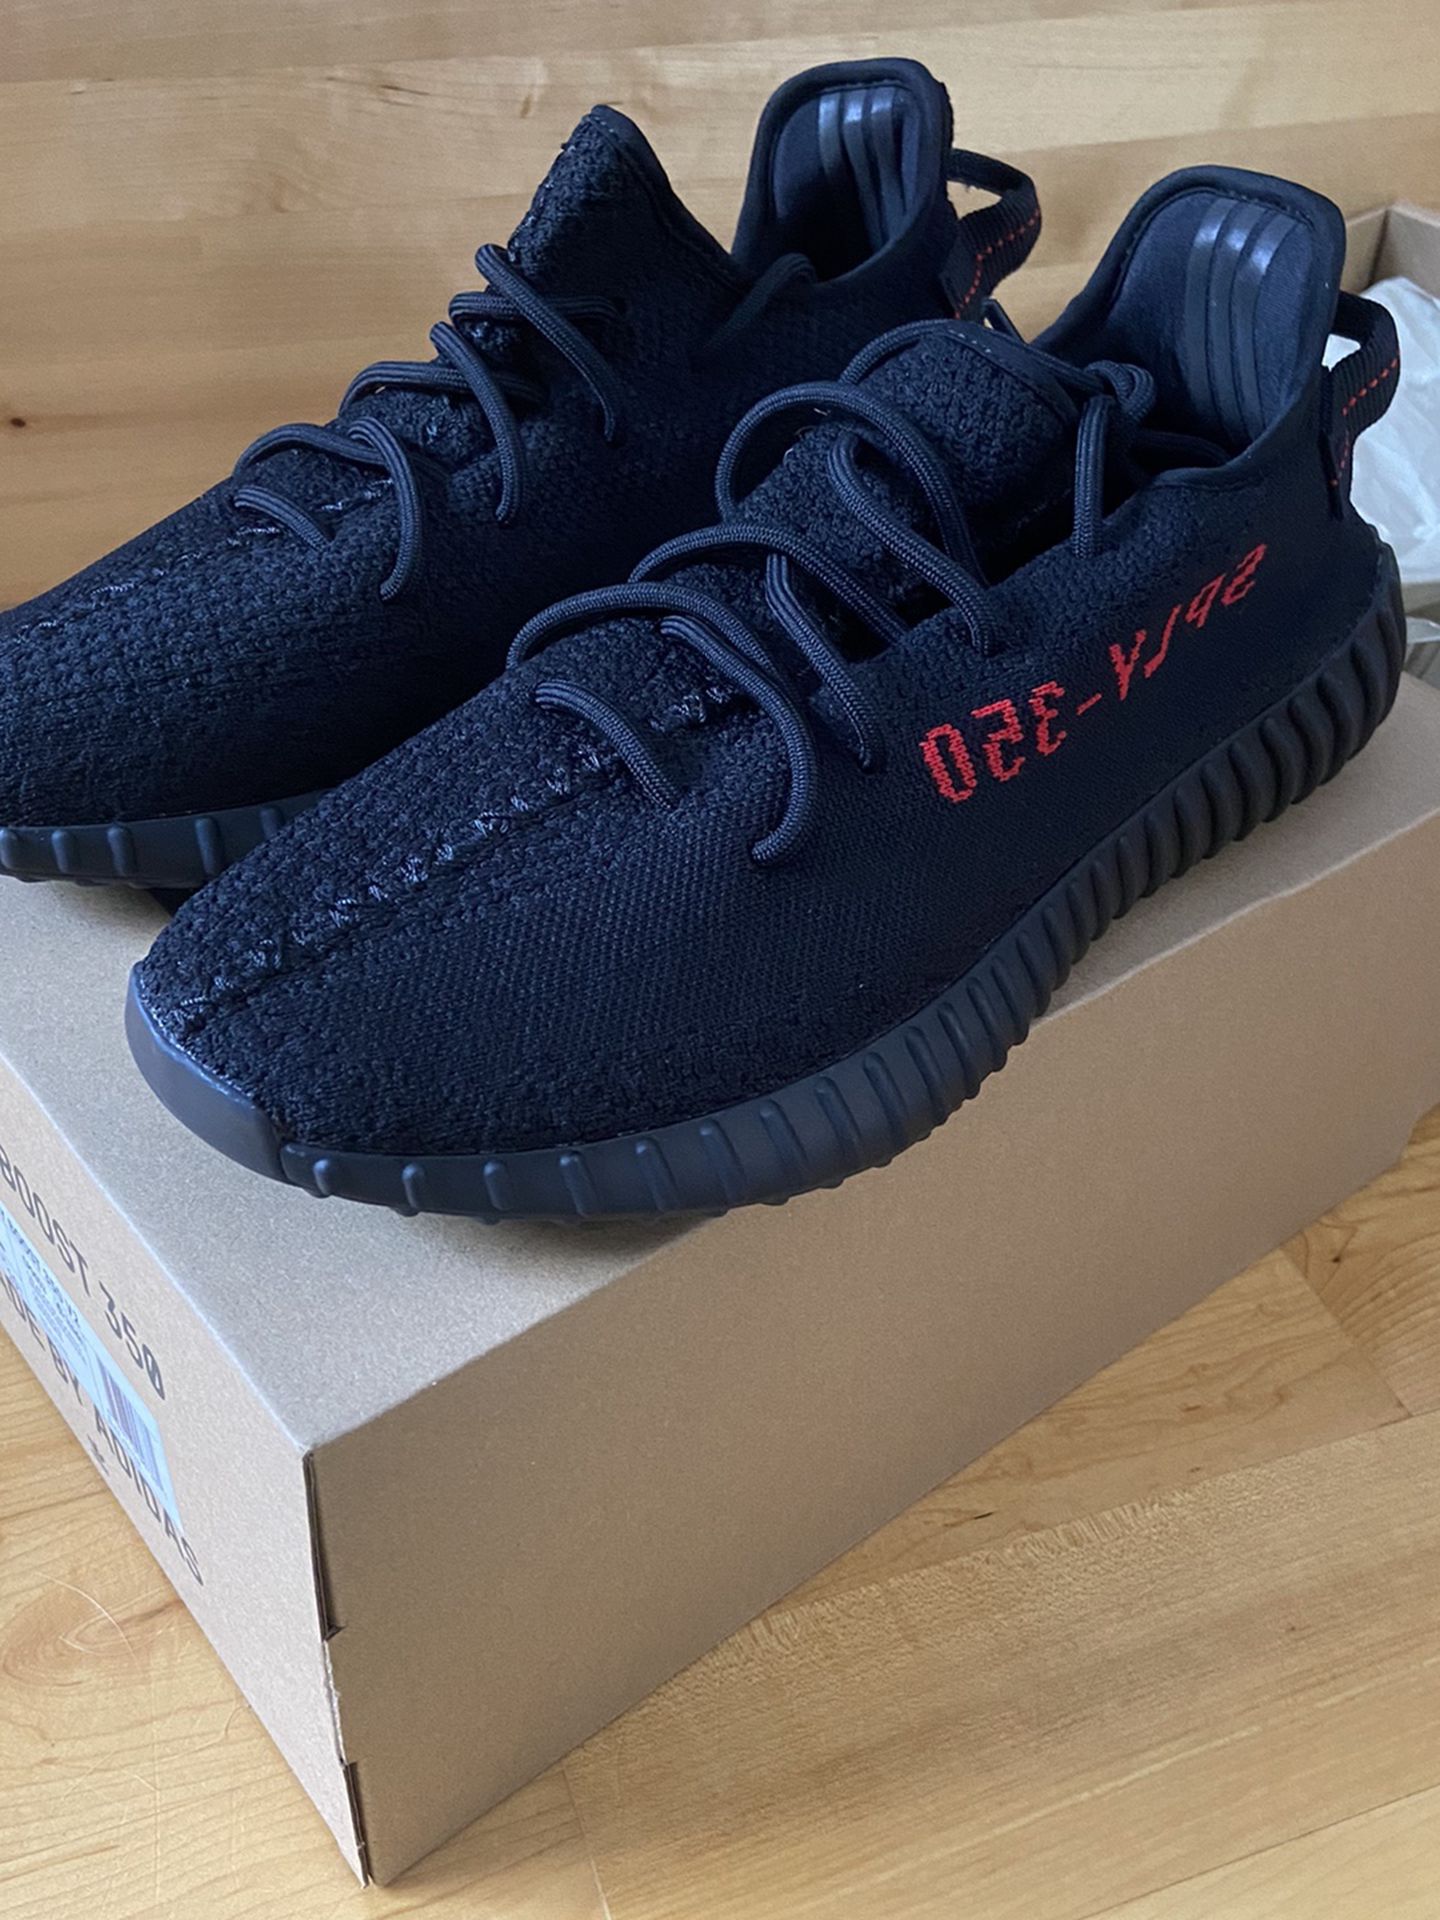 Yeezy Boost 350 “Bred” black/red